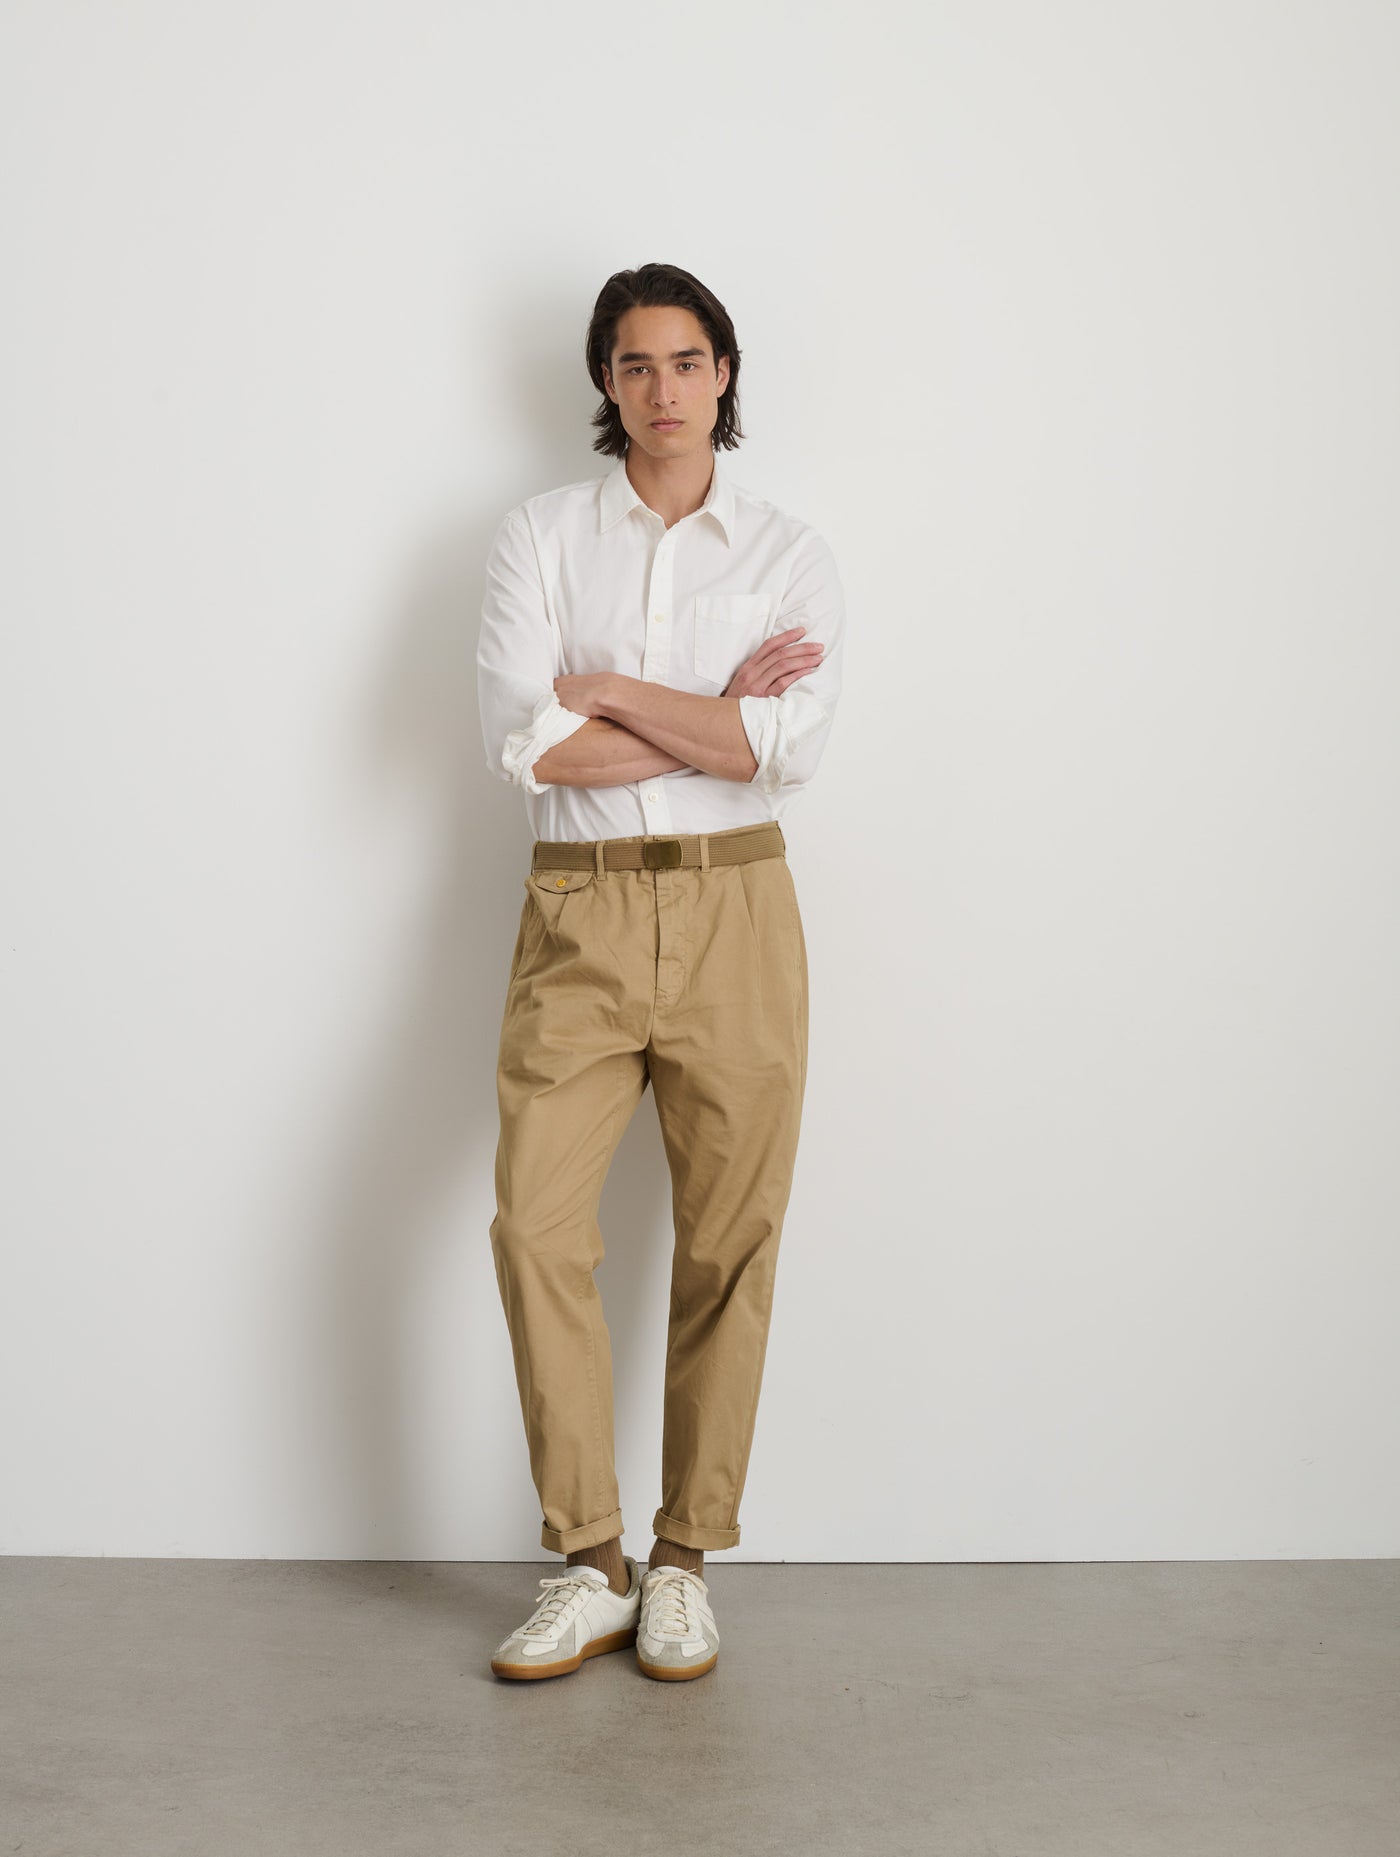 Buy Men Cream Classic Fit Check Pleated Formal Trousers Online - 766068 |  Louis Philippe